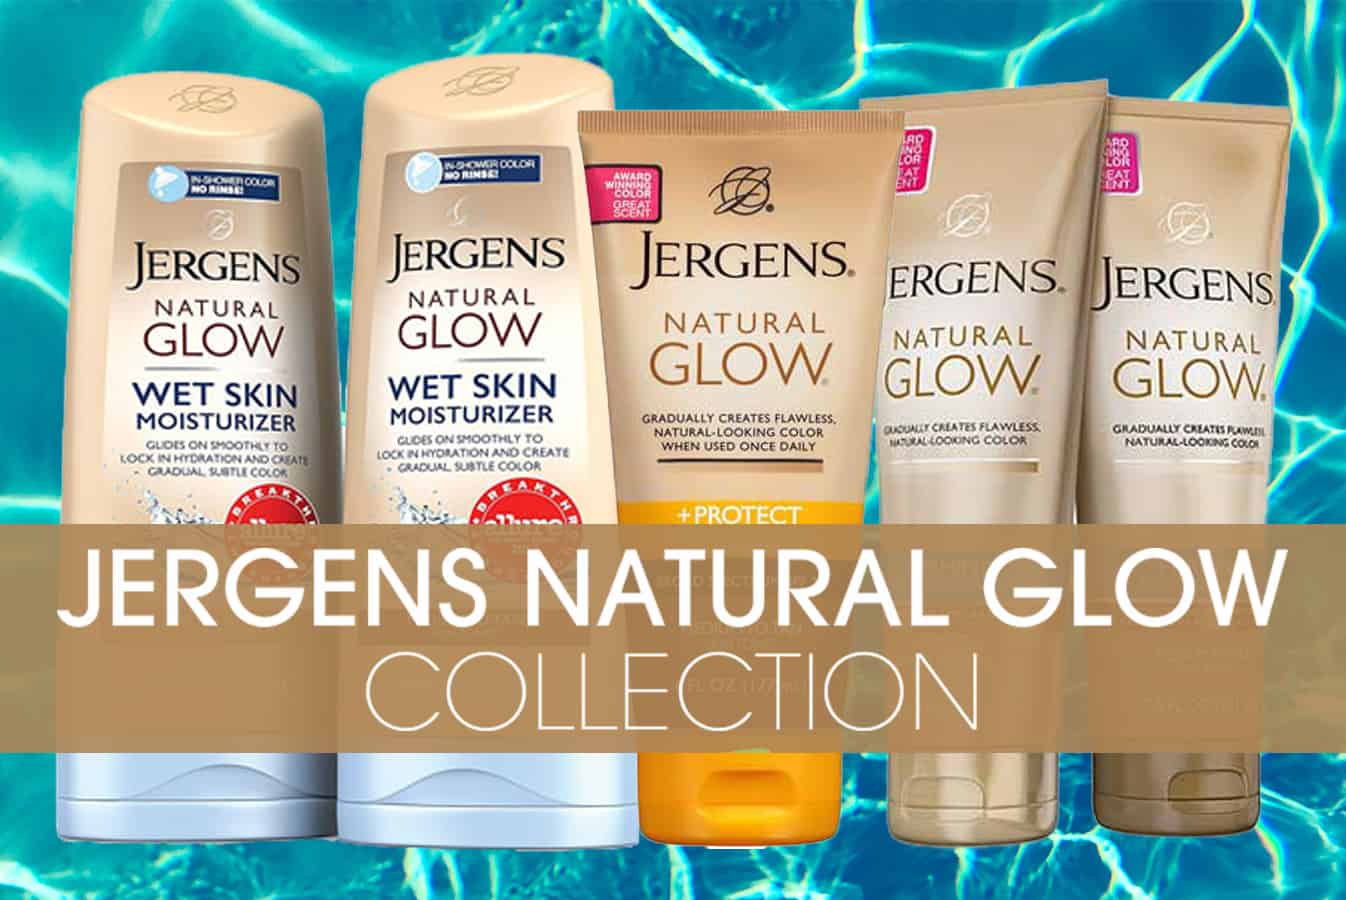 Jergens natural glow collection